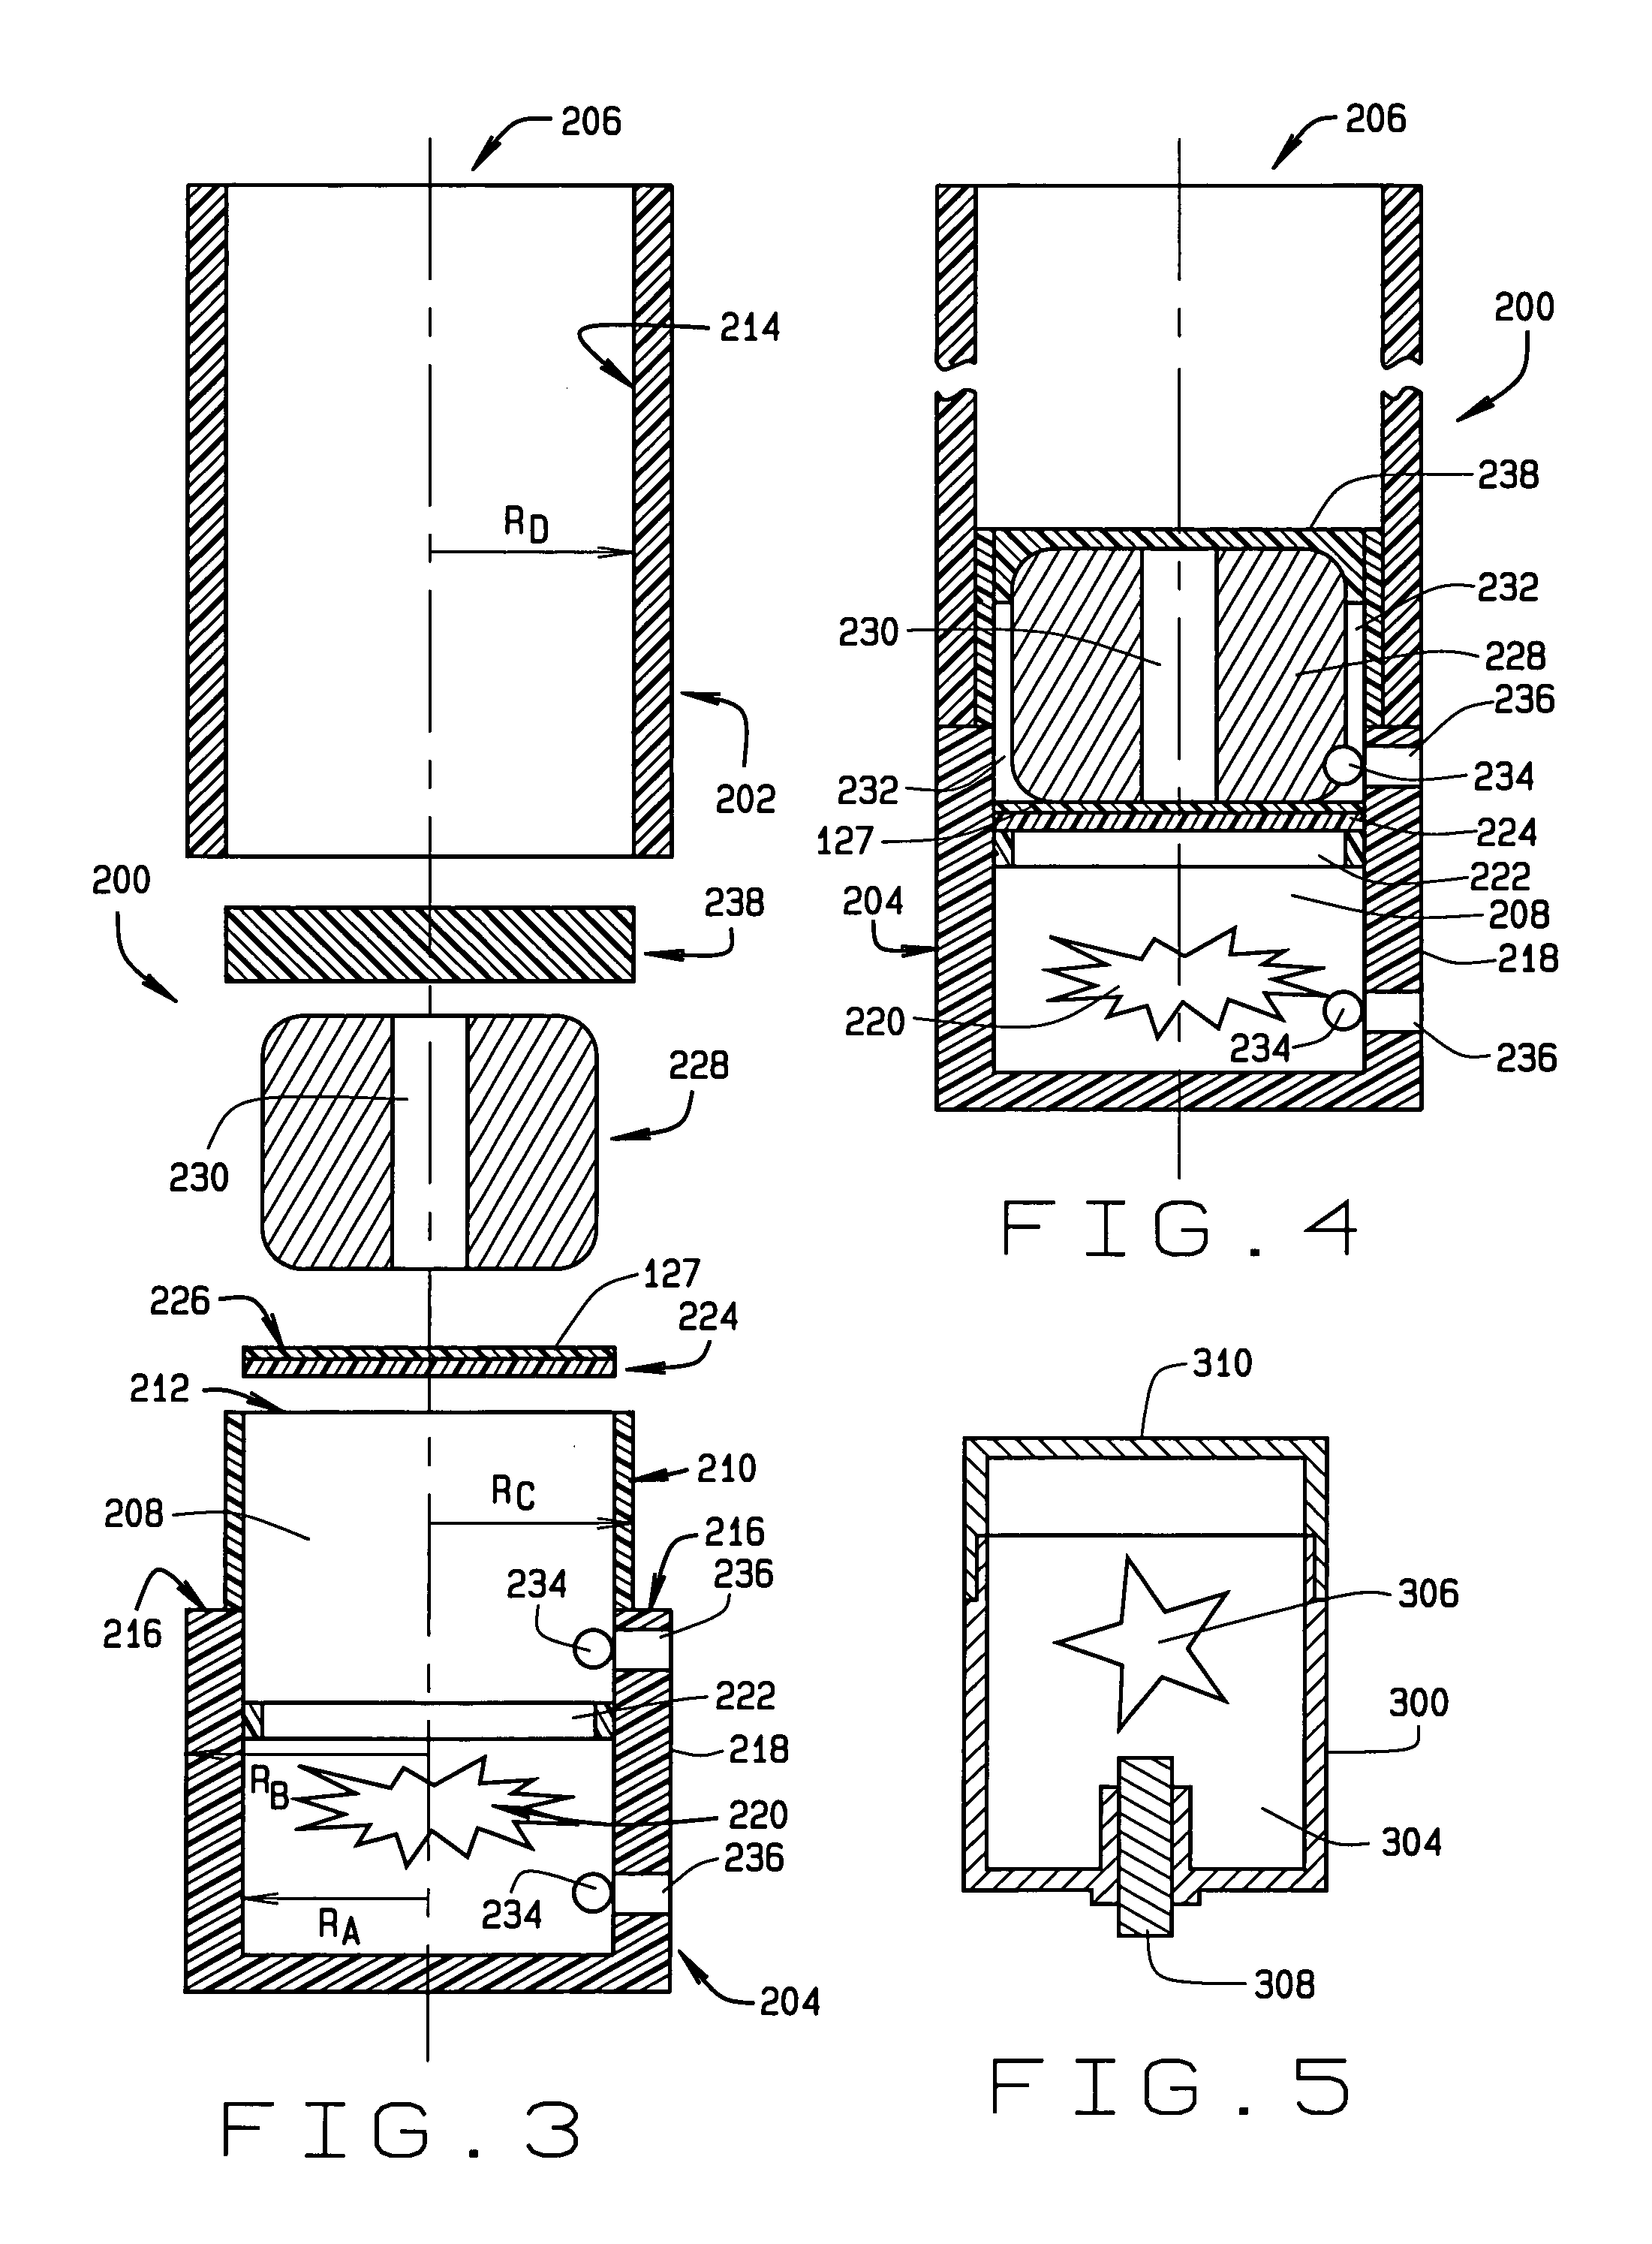 Method and apparatus for smokeless pyrotechnic display